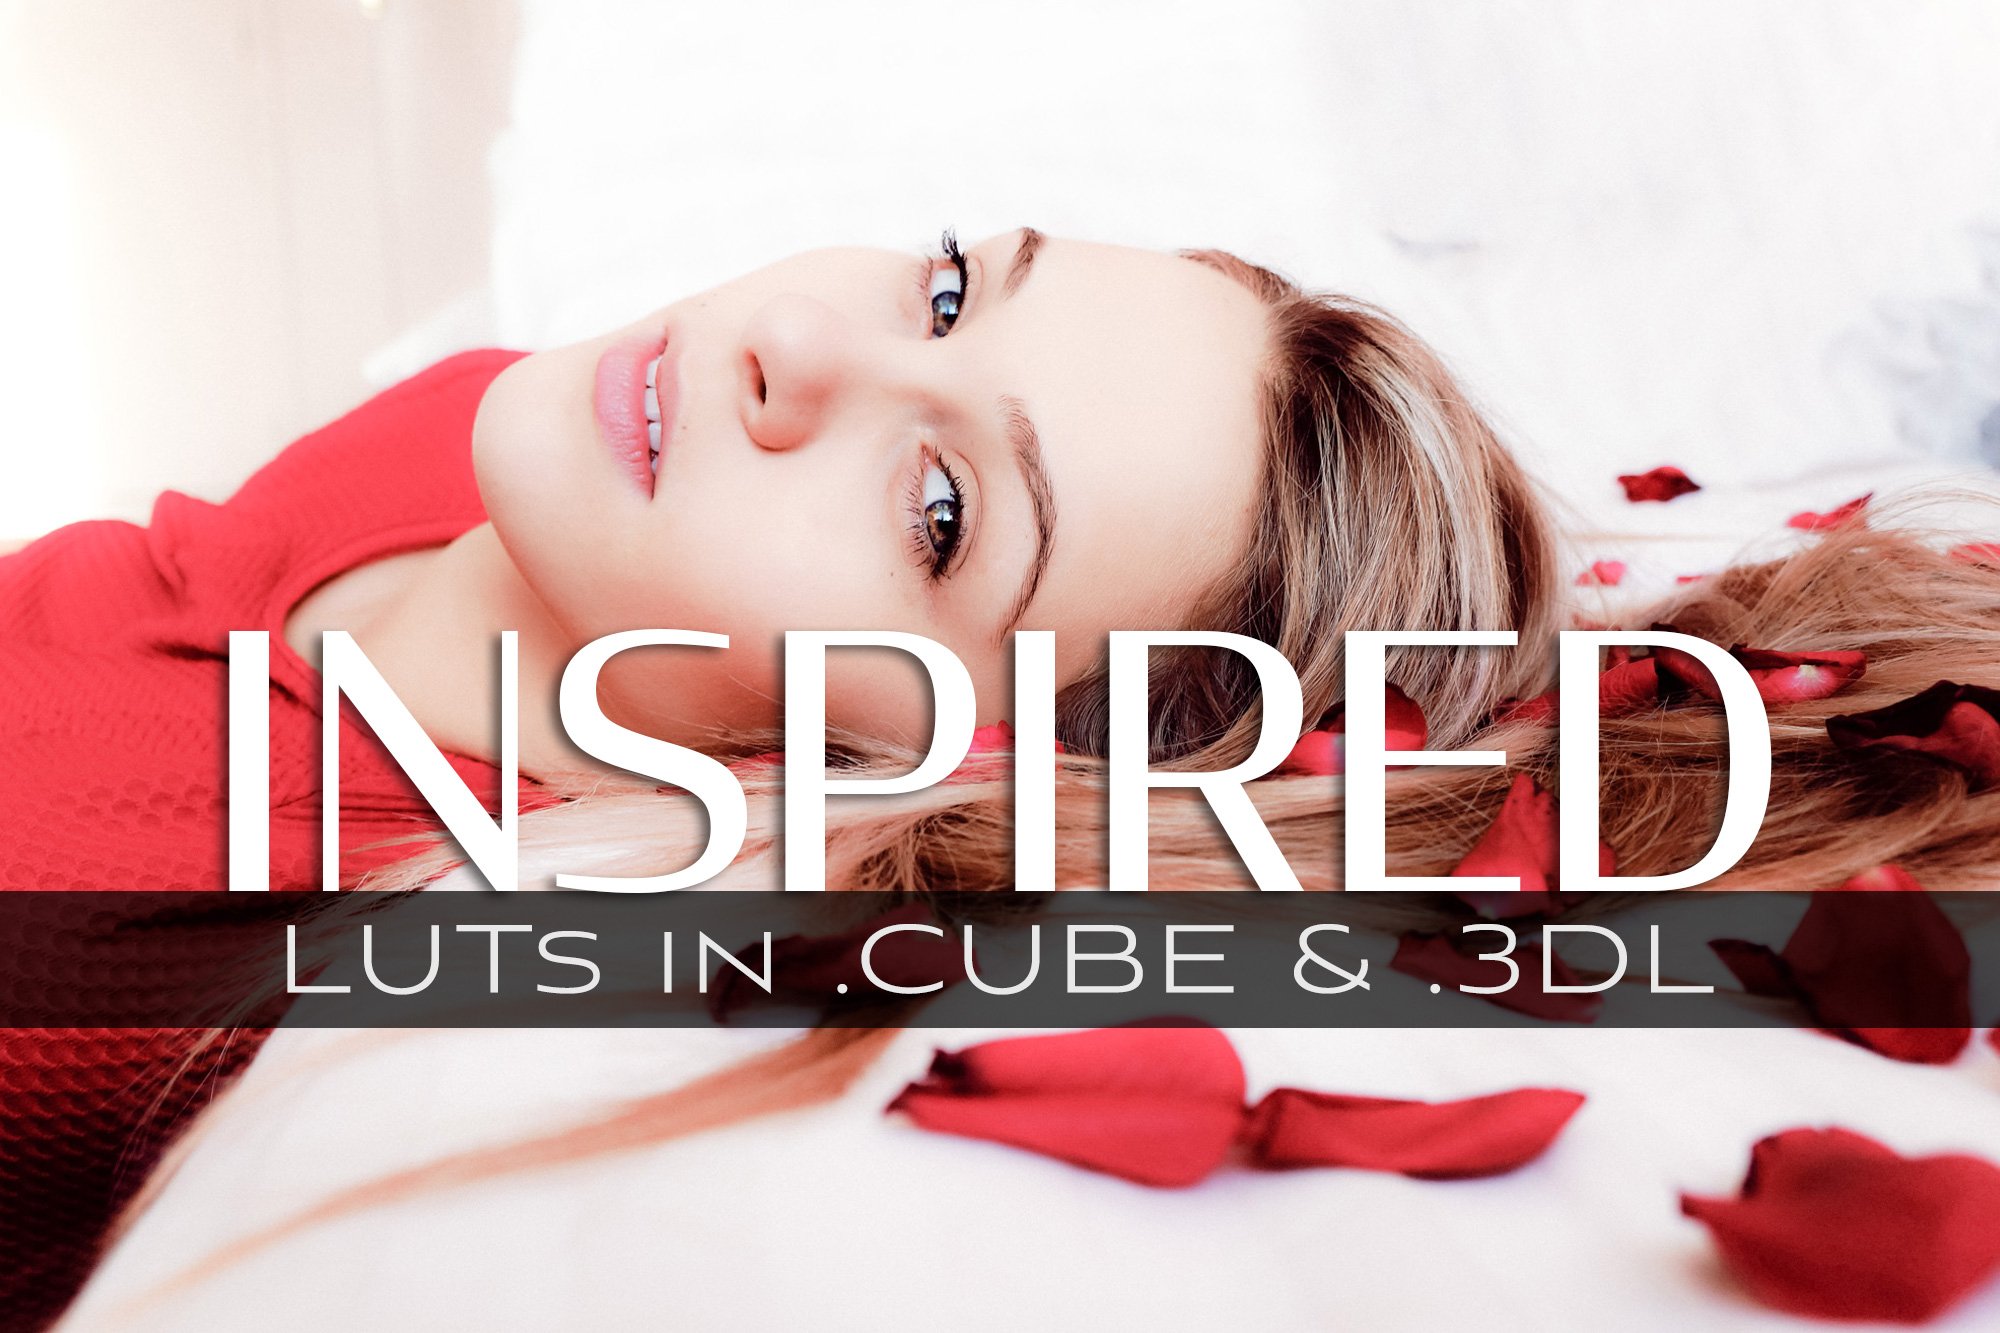 3d LUTs - Inspiredcover image.